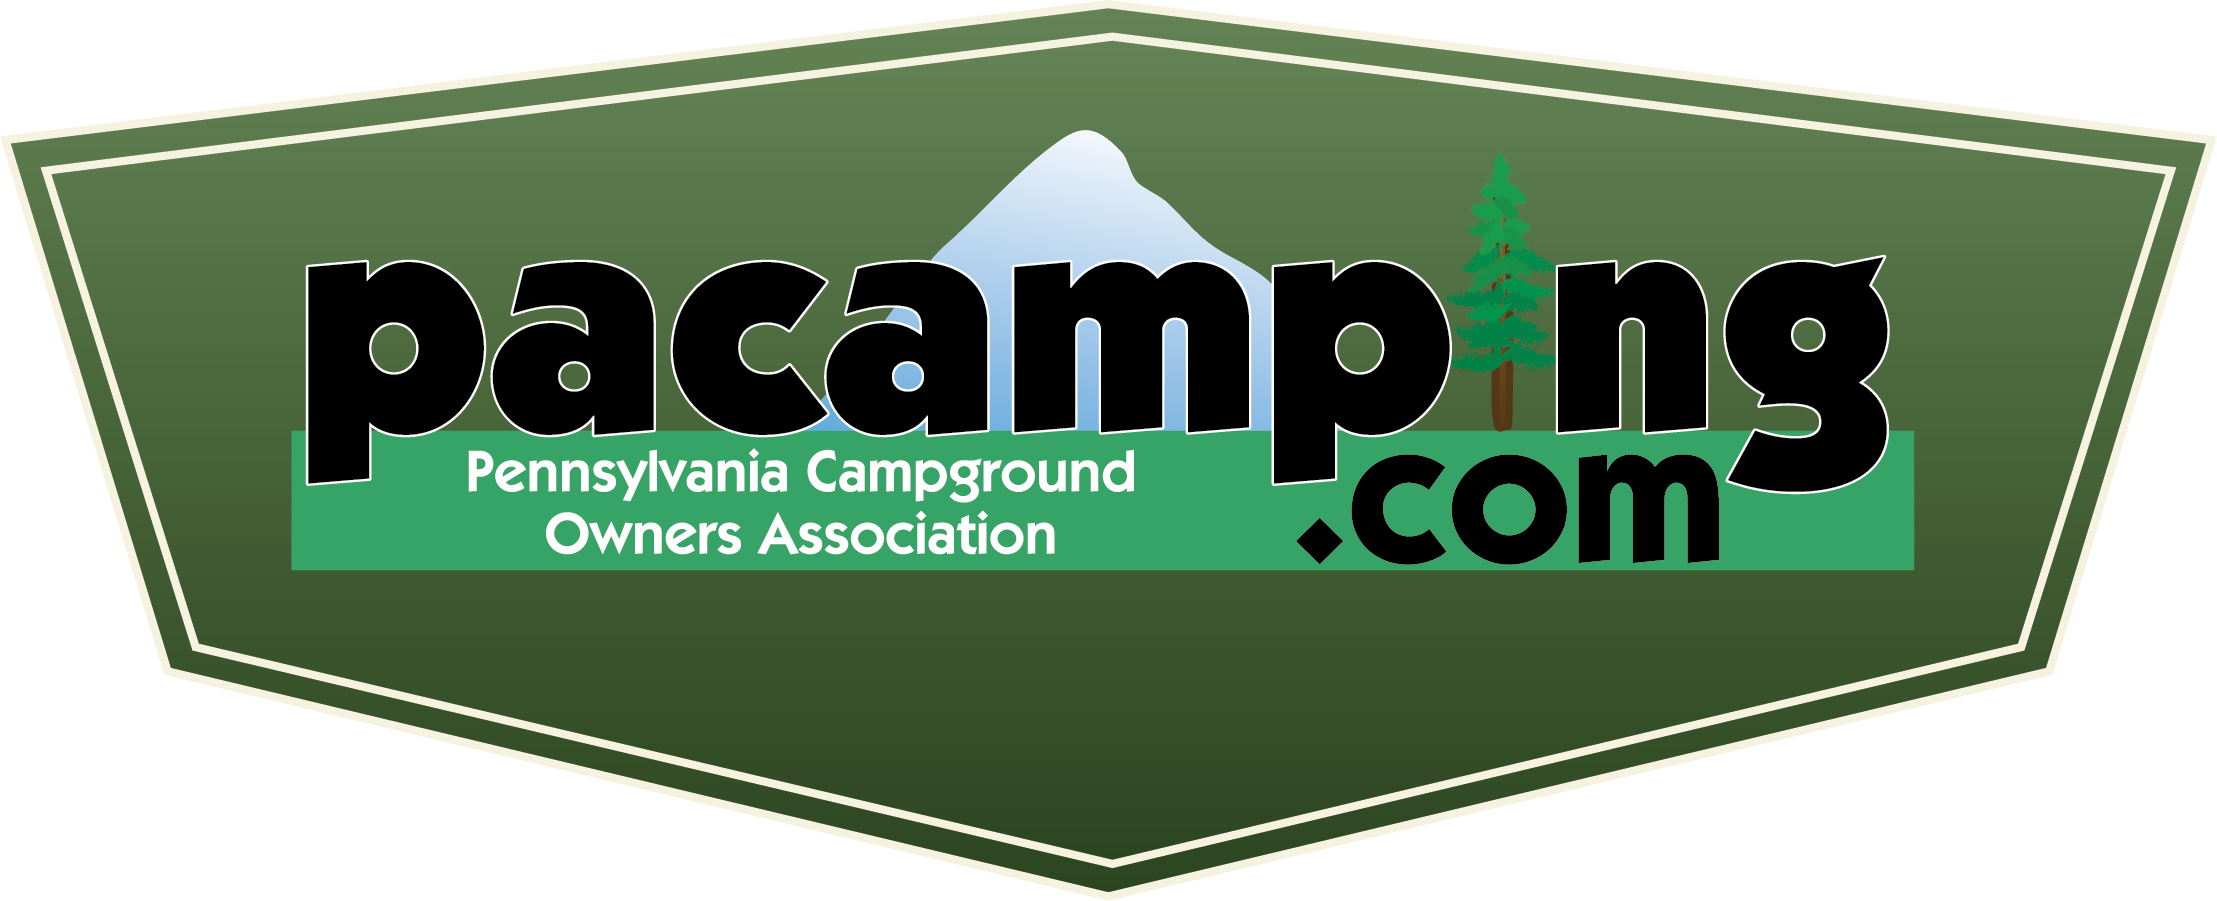 Pennsylvania Campground Owners Association logo